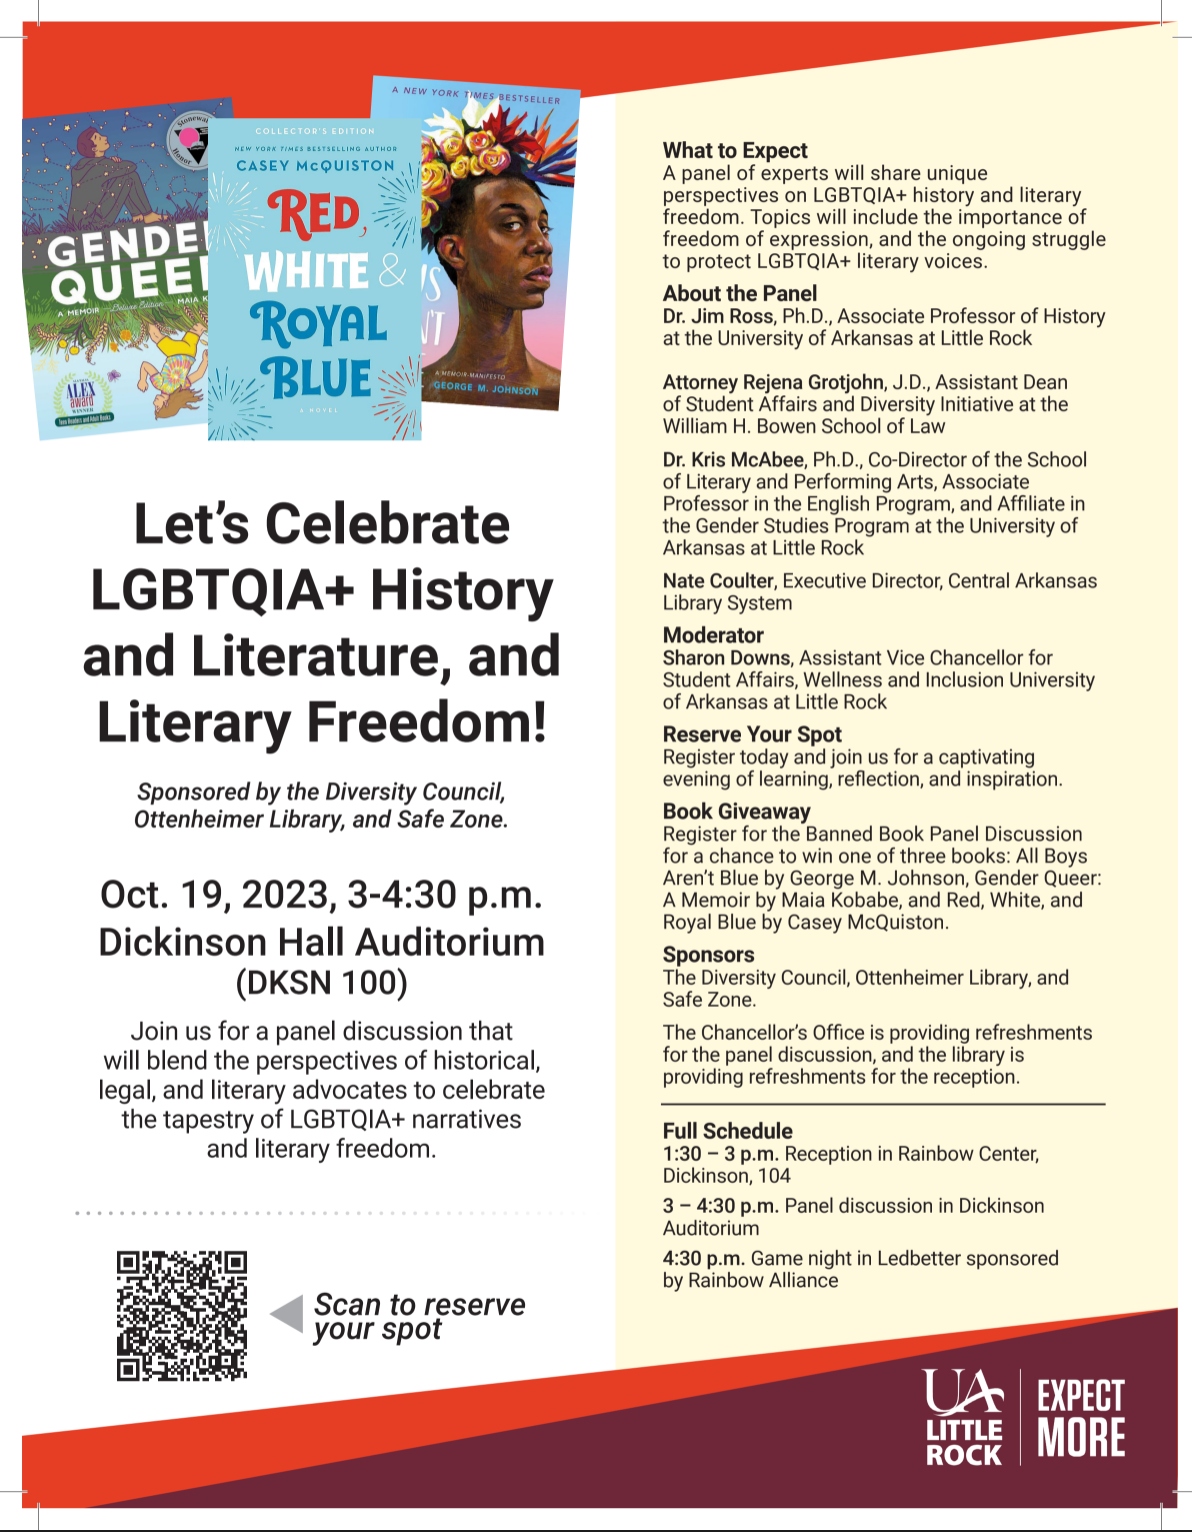 UA Little Rock will hold a panel discussion Oct. 19 exploring LGBTQIA+ history, narratives, and literary freedom.